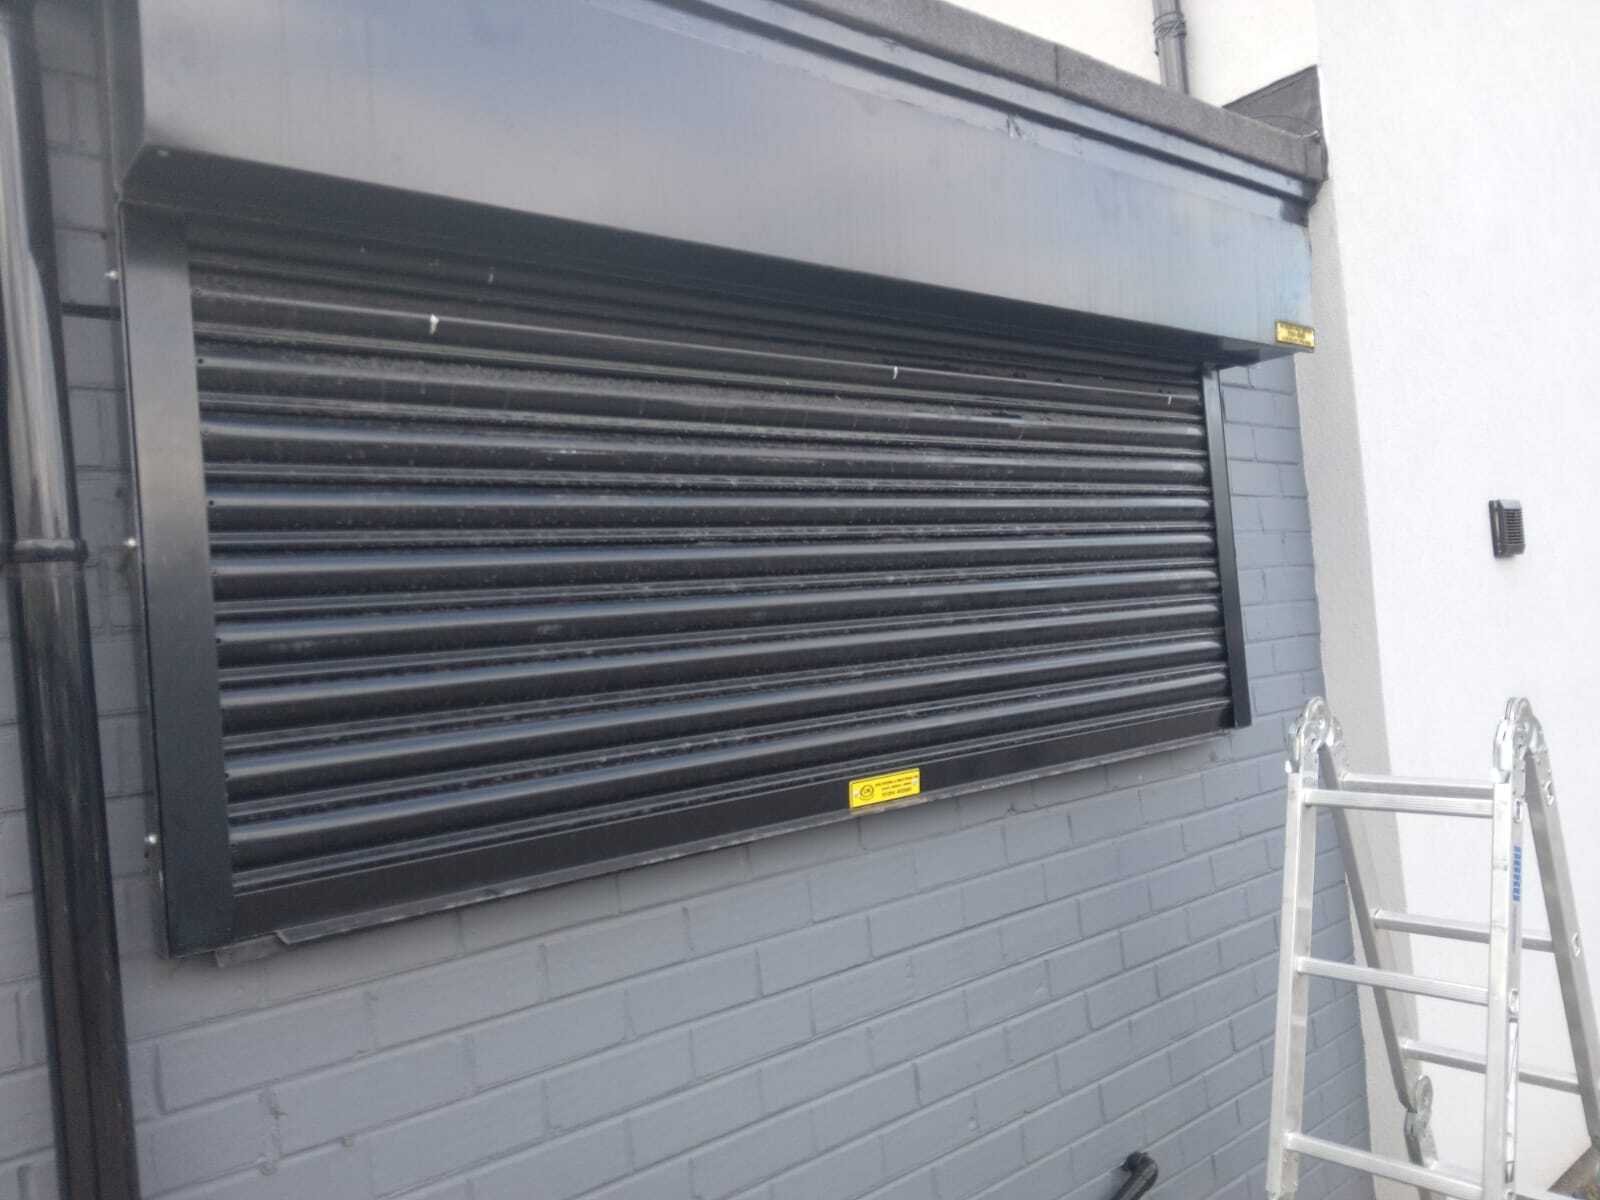 Roller Security Shutter Doors - What Are They?